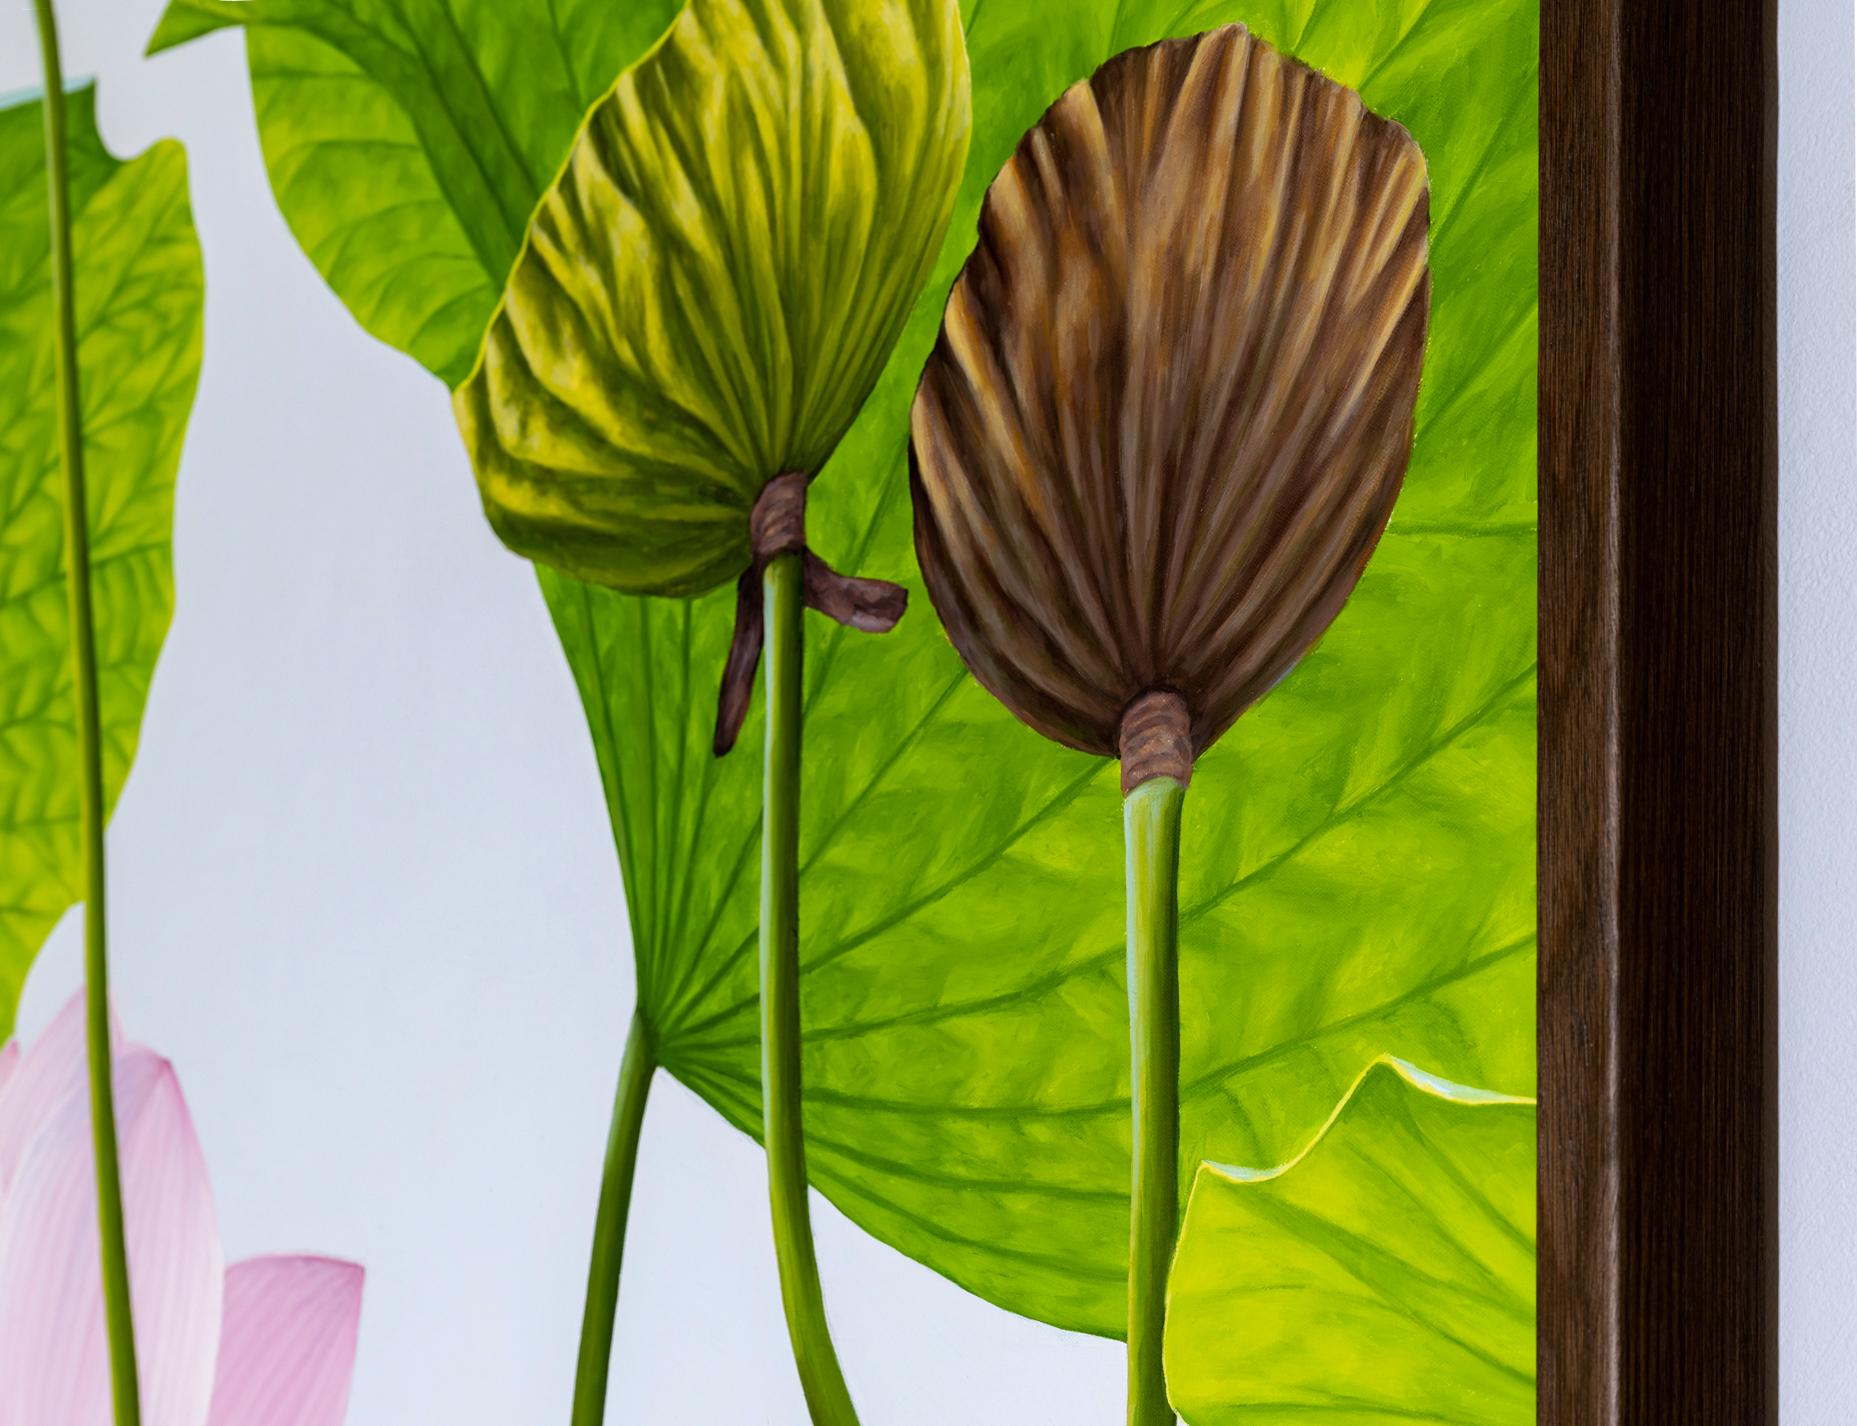 Photorealist still life painting on canvas of a light pink lotus flower with brown lotus pods and green petals against a light grey background
